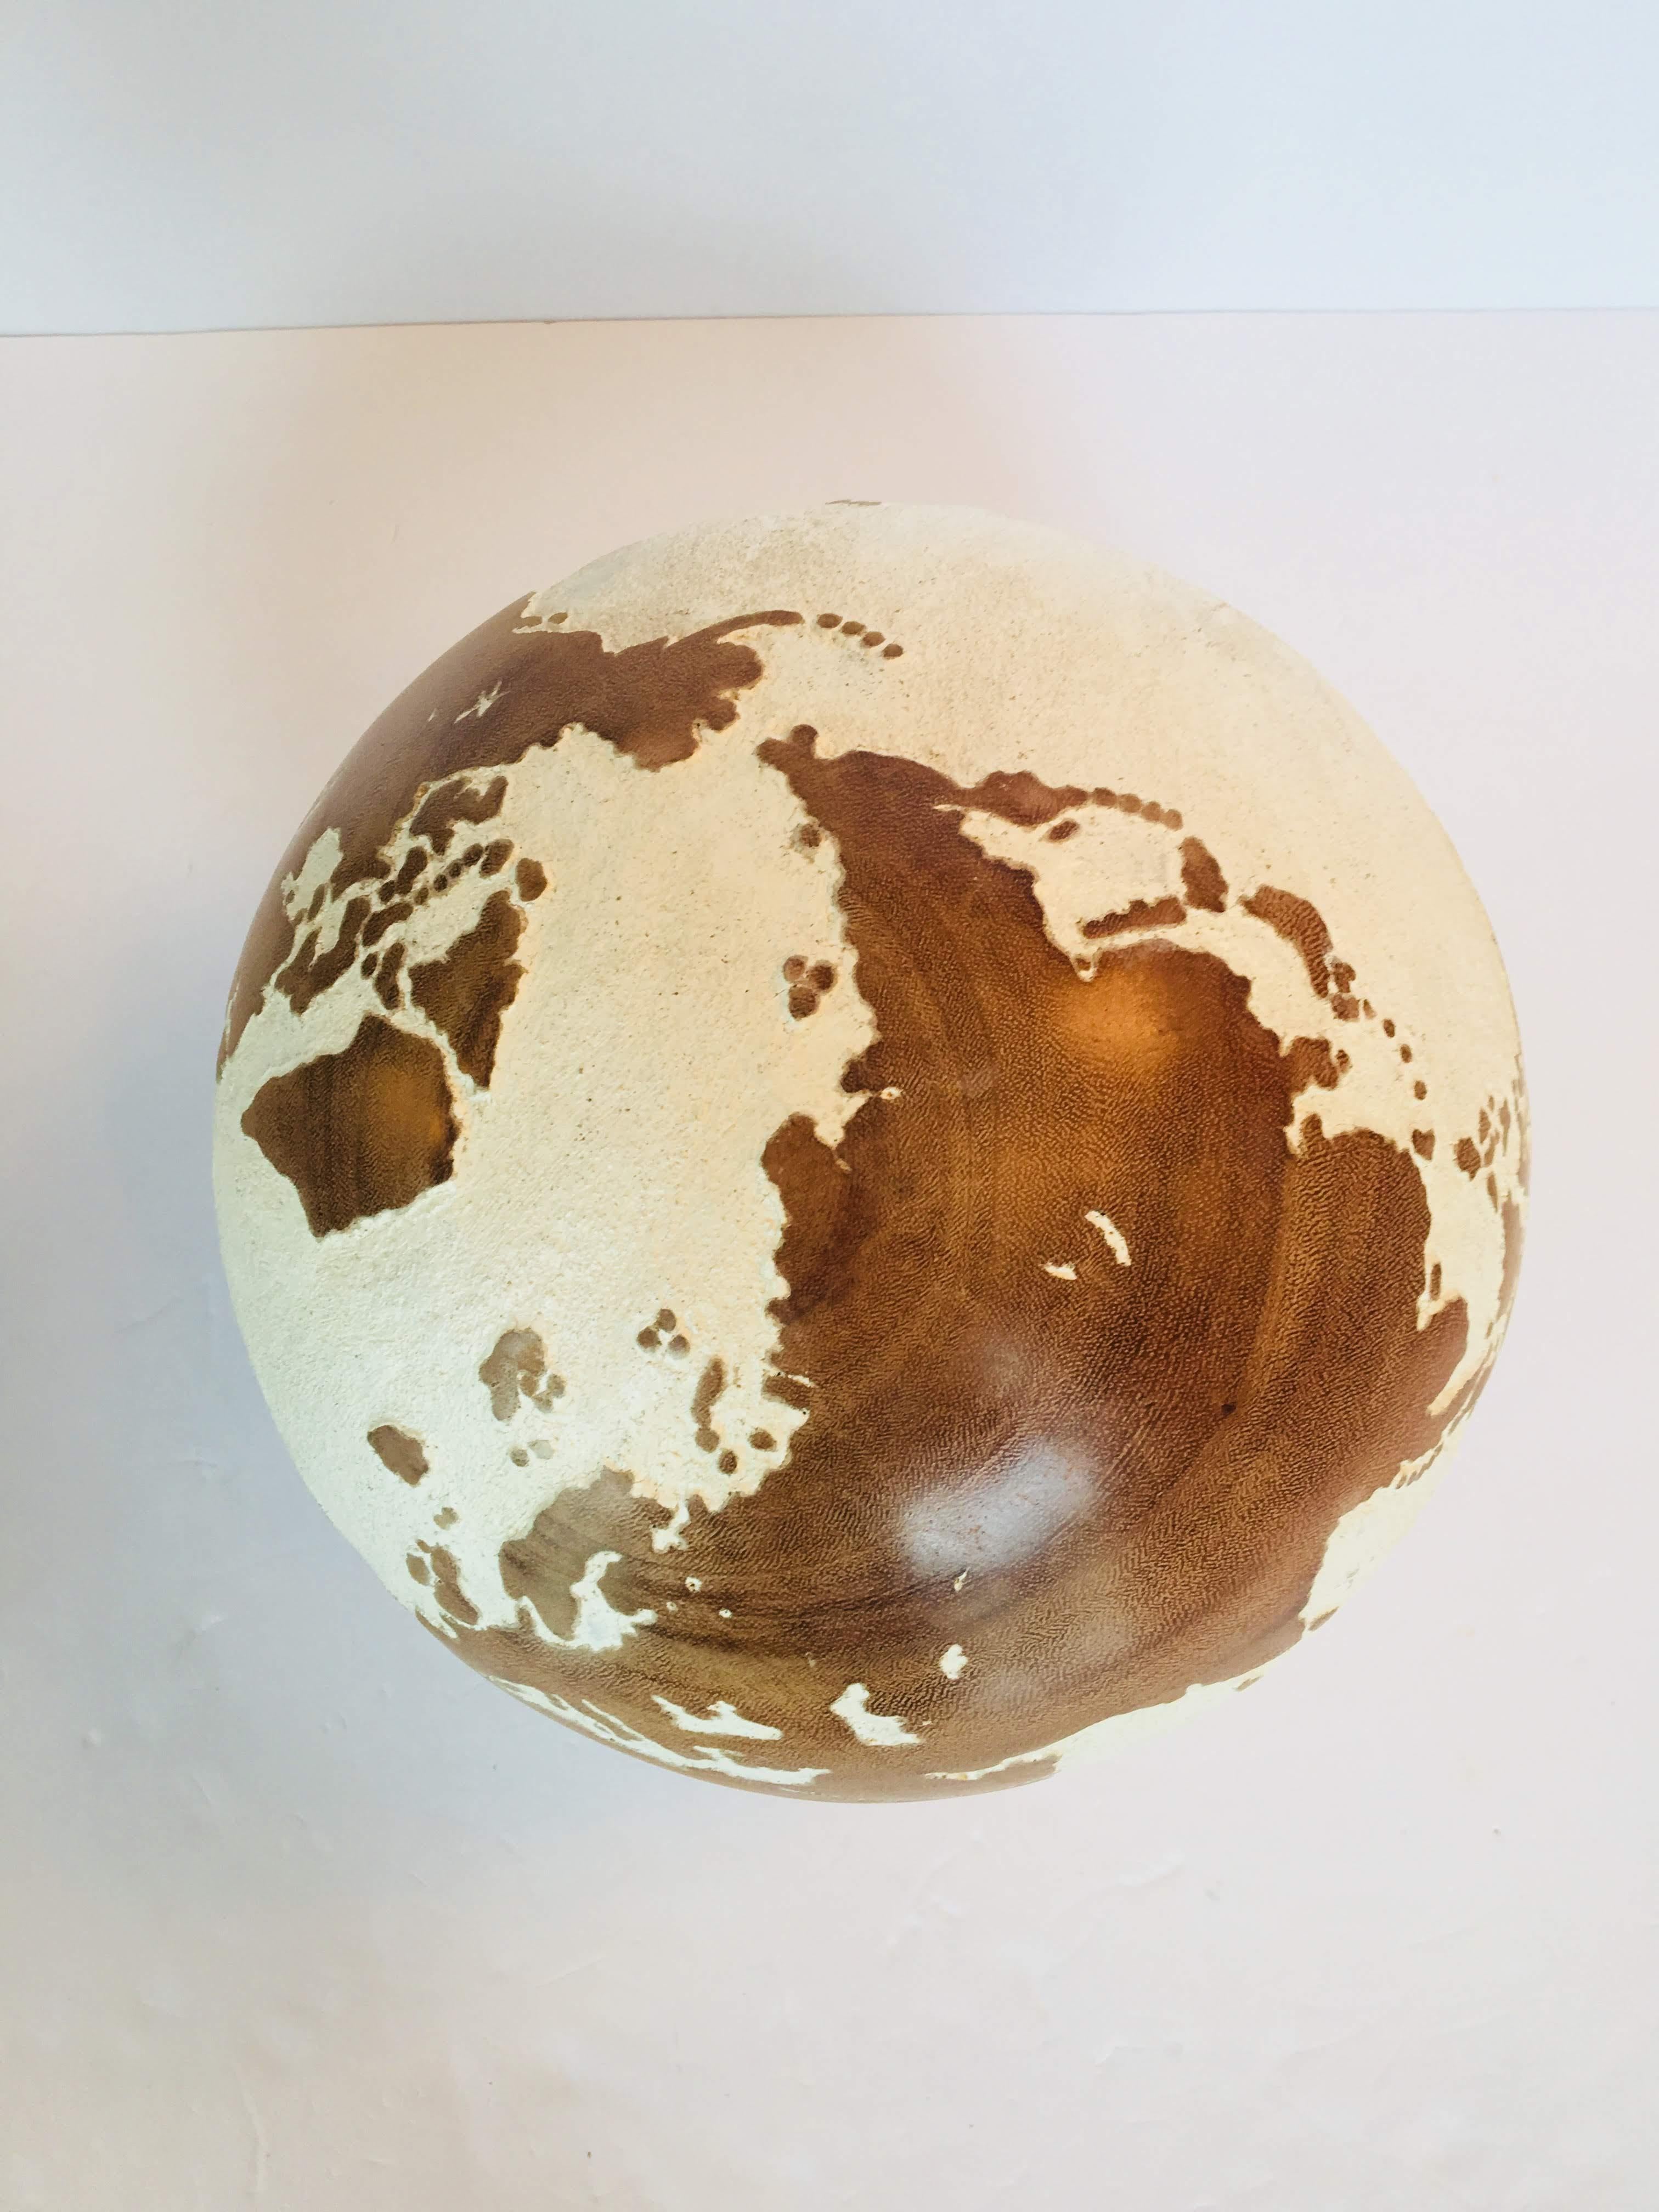 This 30 cm globe is from the 1st generation / made of Suar Wood / Acrylic resin
White painted solid wood carved globe on wooden stand. 
Made between 1998-2000
